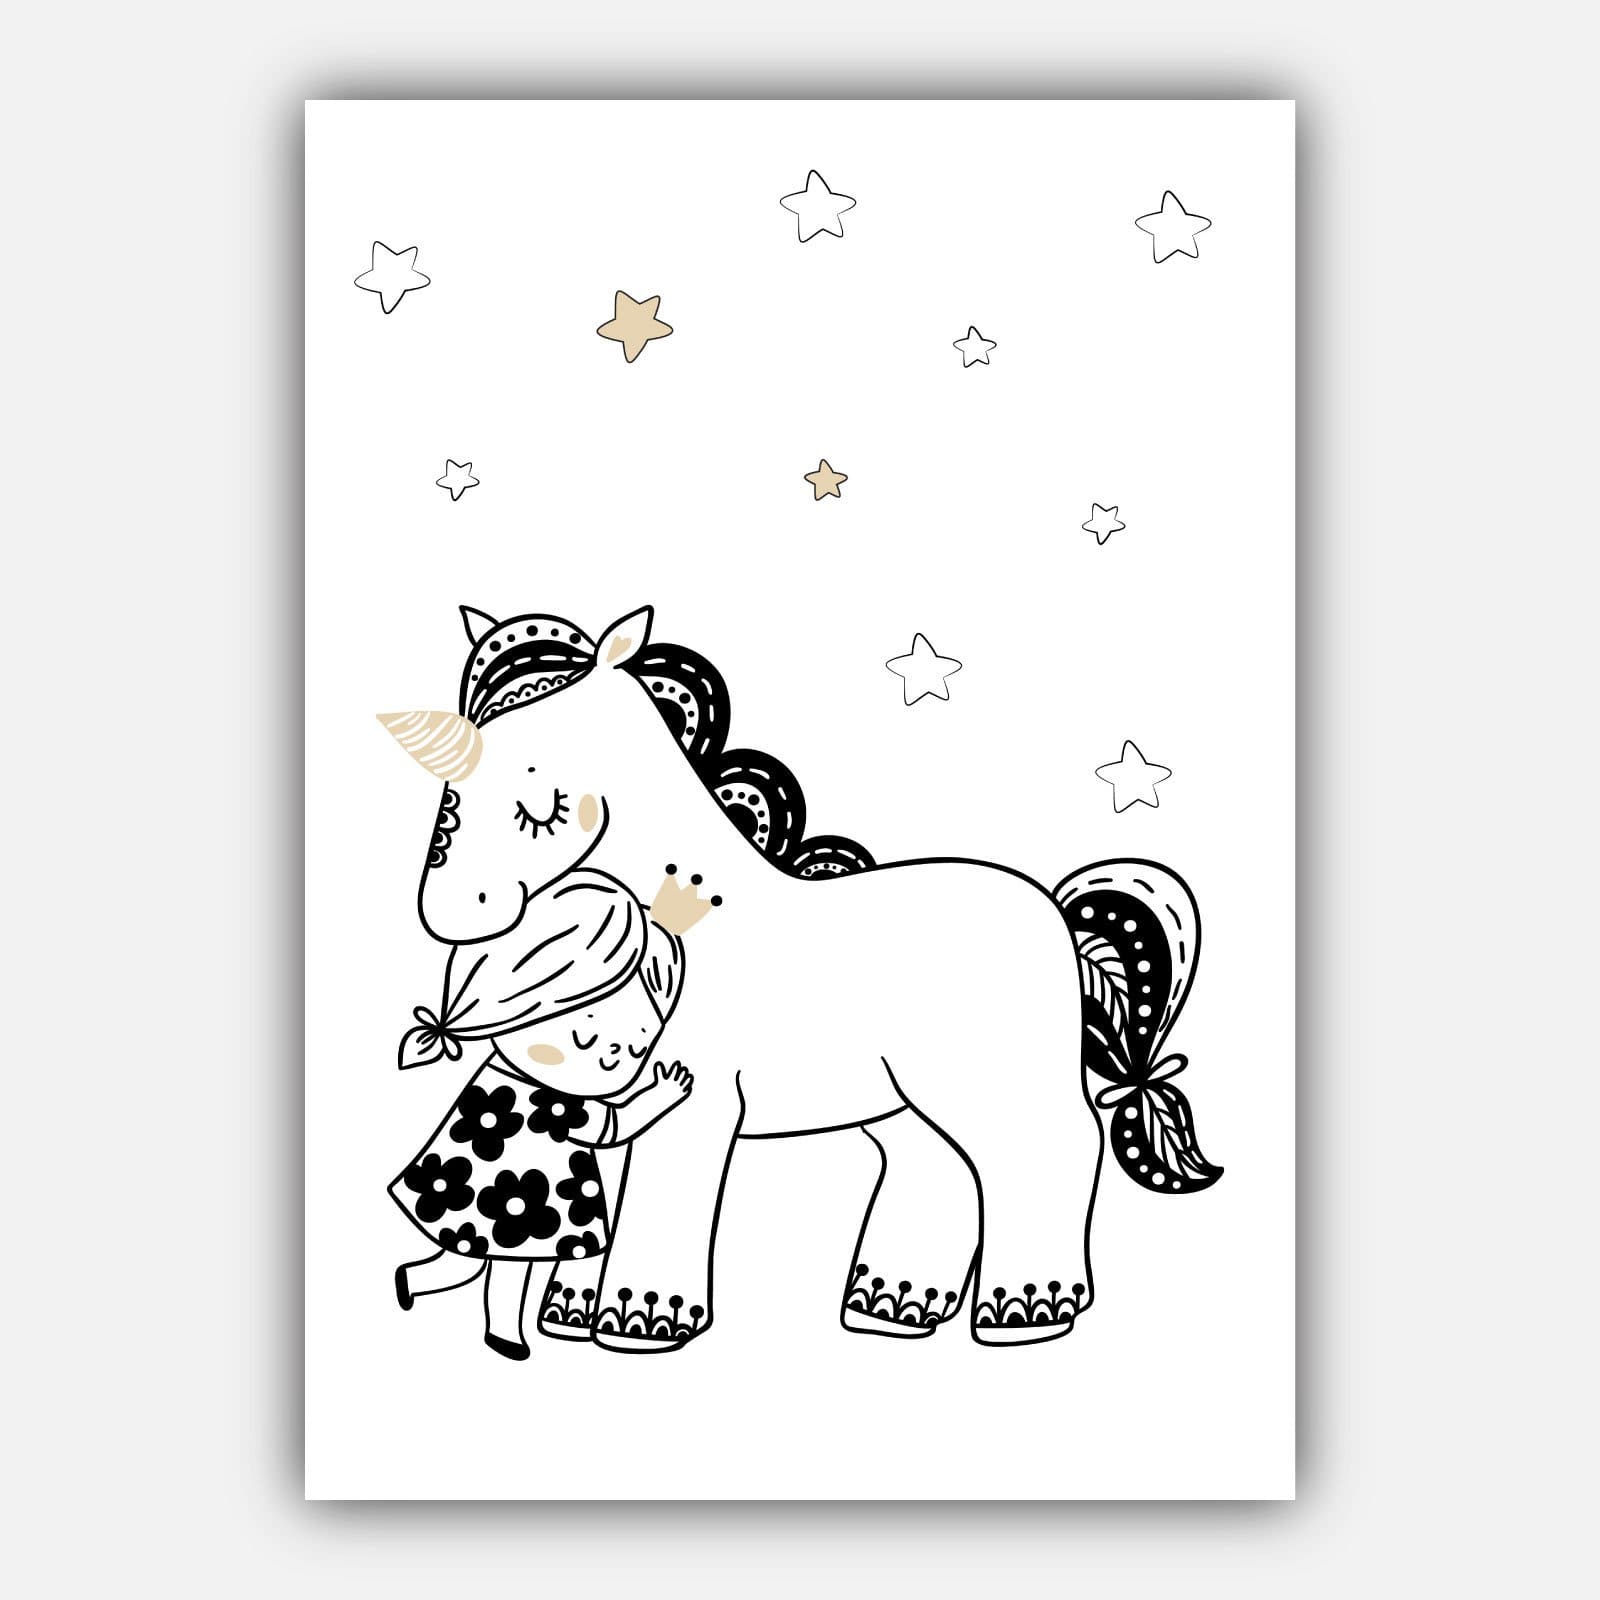 NURSERY Set of 5 PRINCESS Unicorn, So Loved, Love you to the Moon and Back Scandinavian Gallery Wall Art Prints Picture Posters